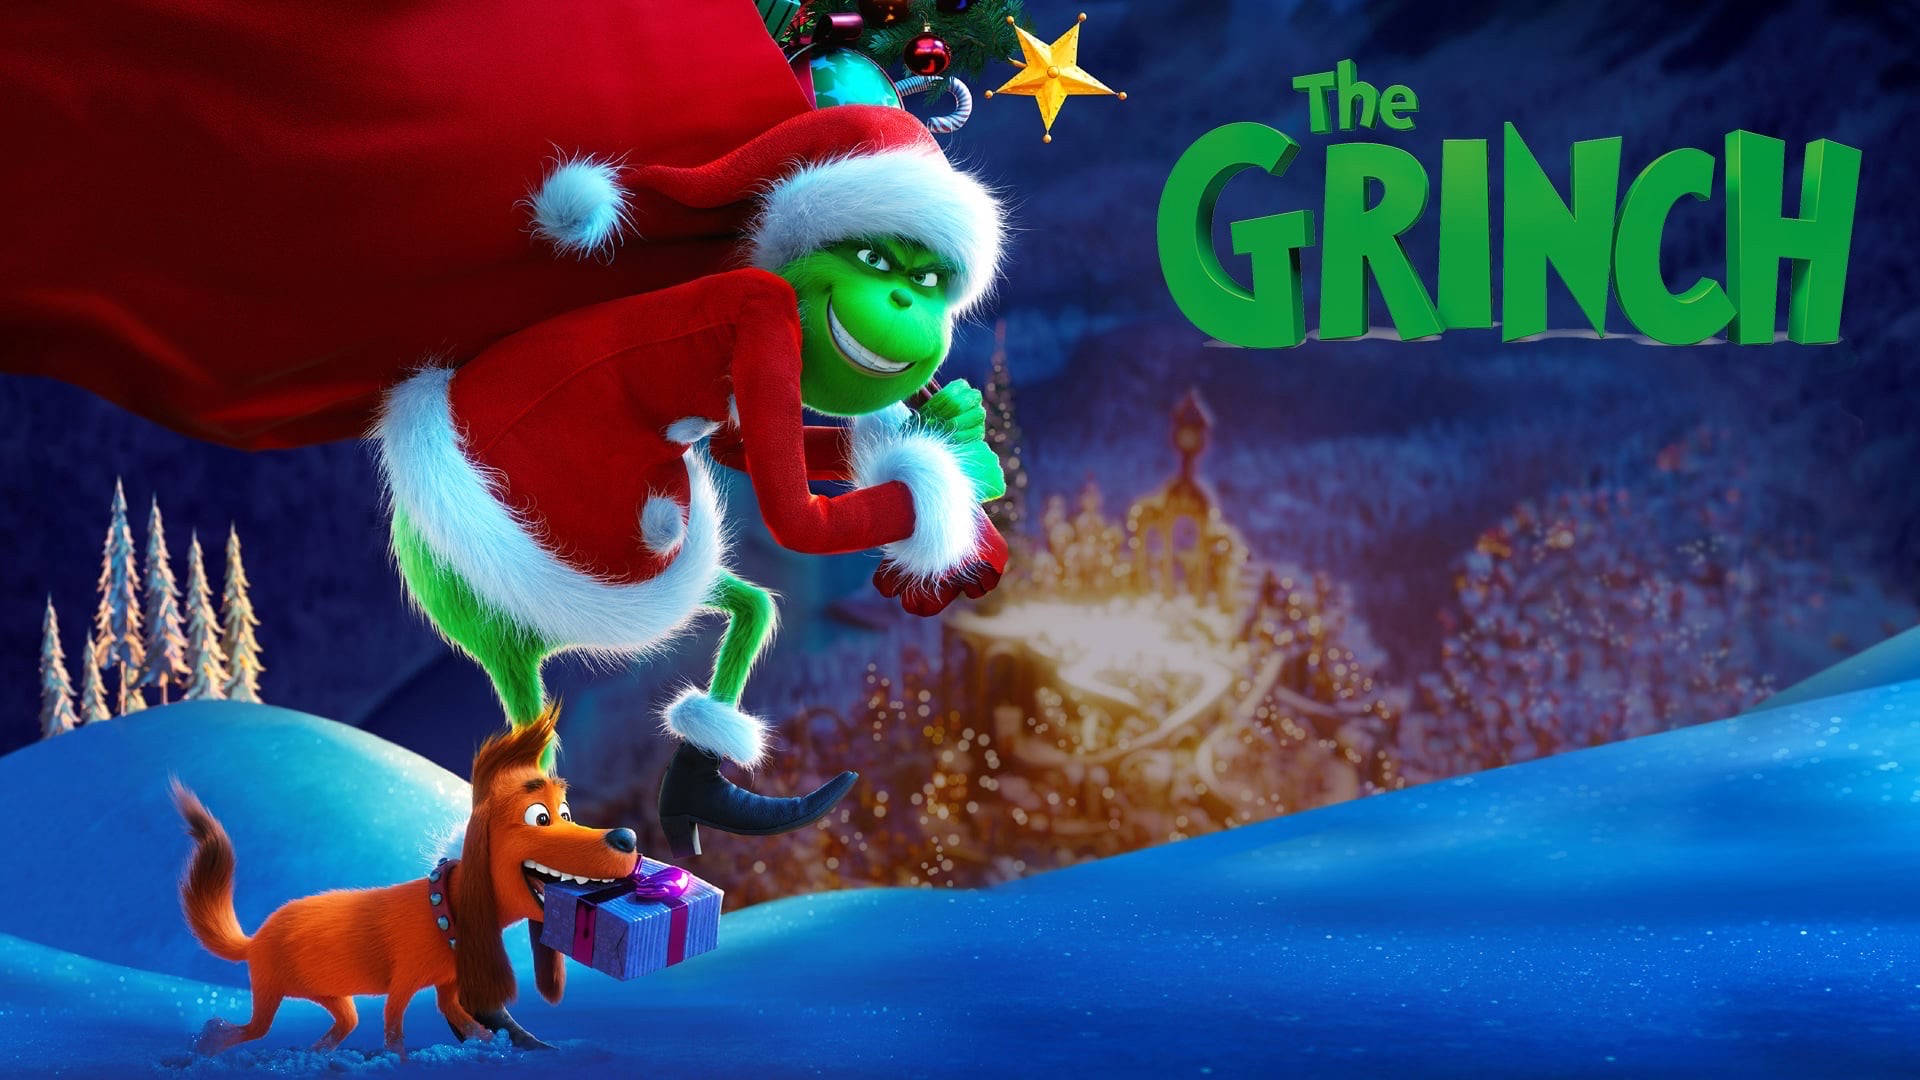 Download The Grinch Stealing Wallpaper Wallpapers Com